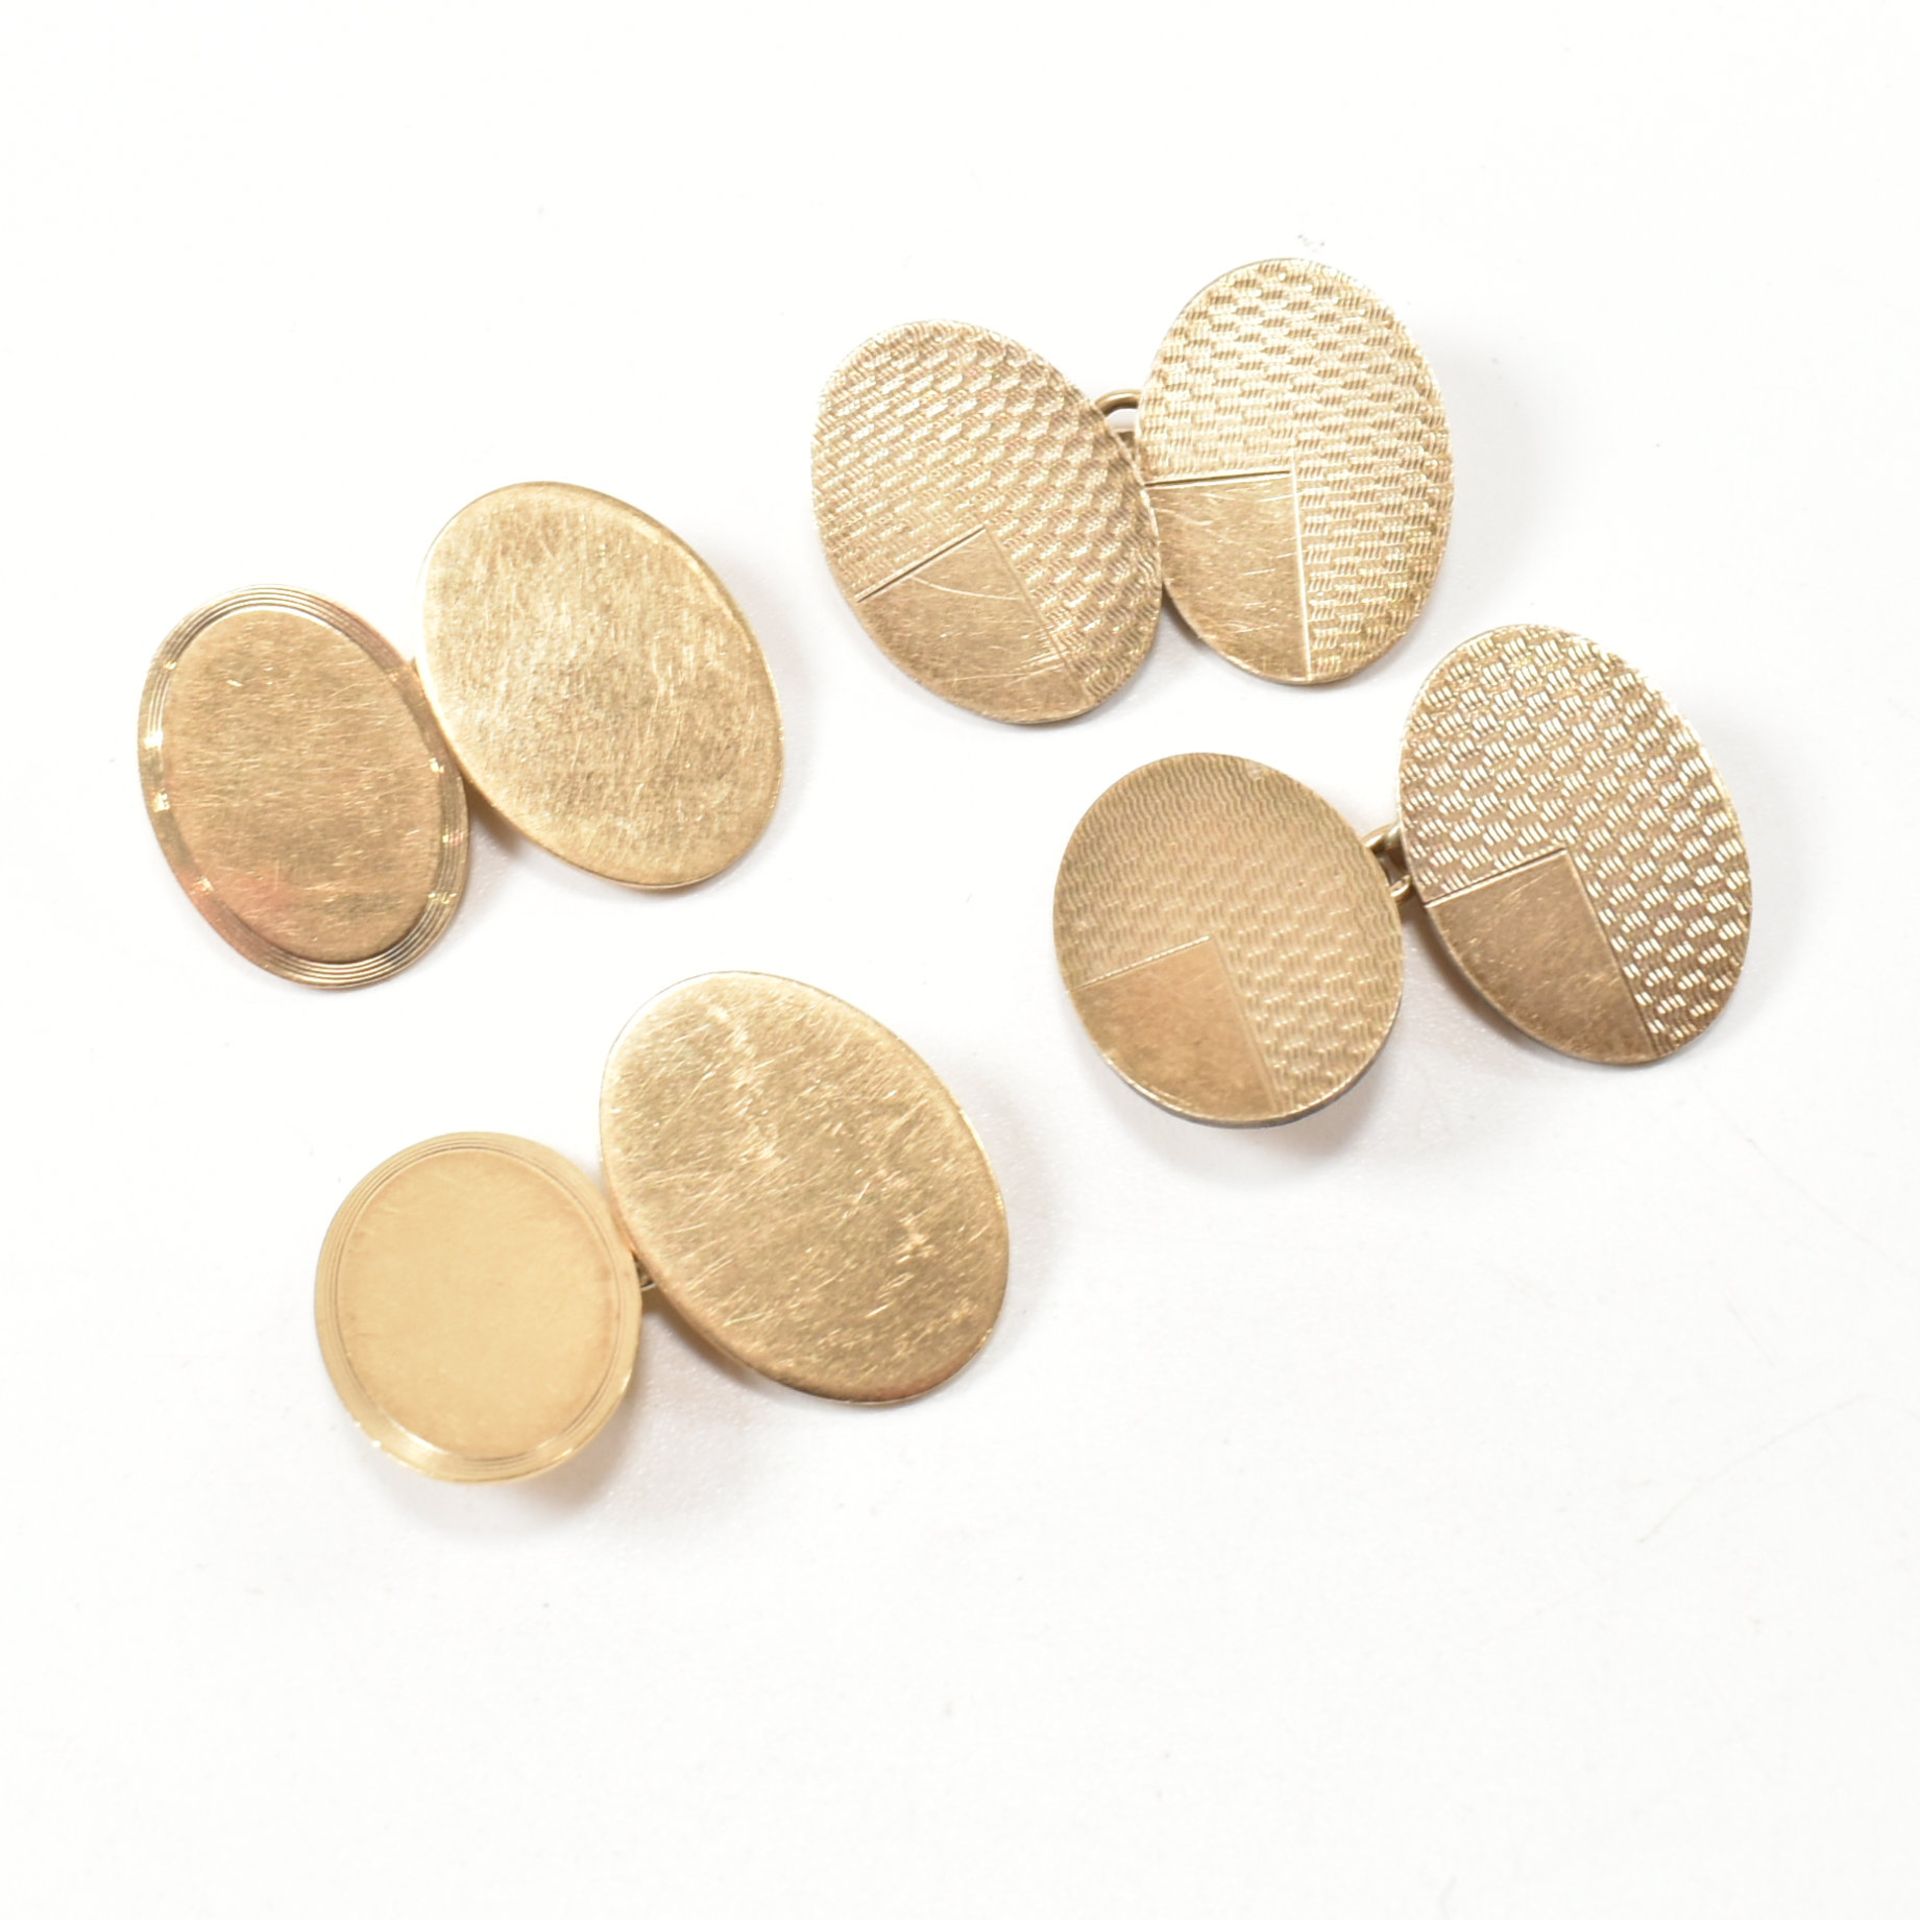 A PAIR OF 9CT GOLD CUFFLINKS & 9CT GOLD ON SILVER CUFFLINKS - Image 2 of 5